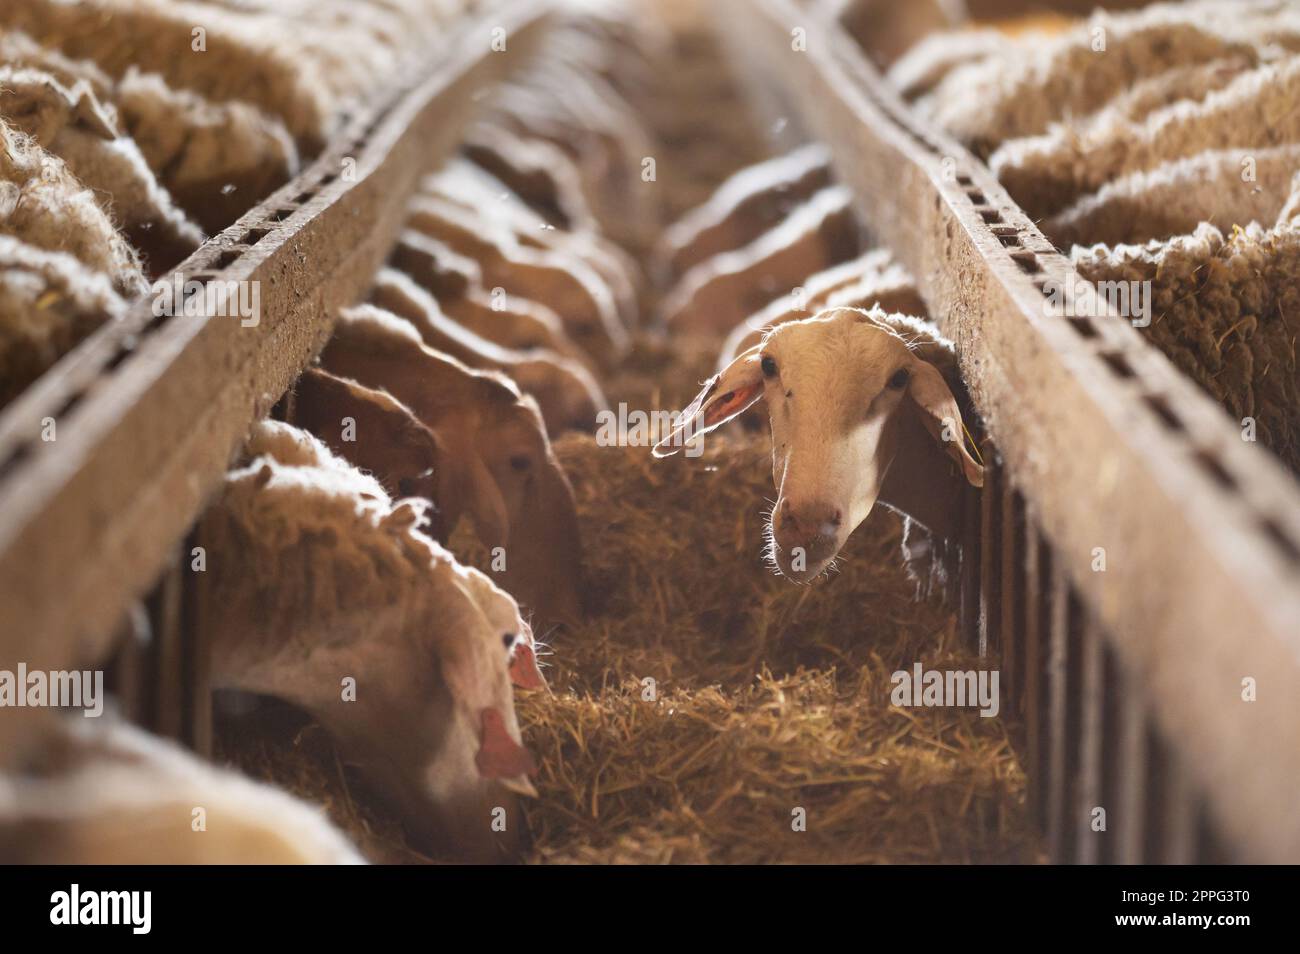 Sheep eating hay in shed. Domestic animals feeding at stable. Cattle feed concept. Livestock farm. Stock Photo